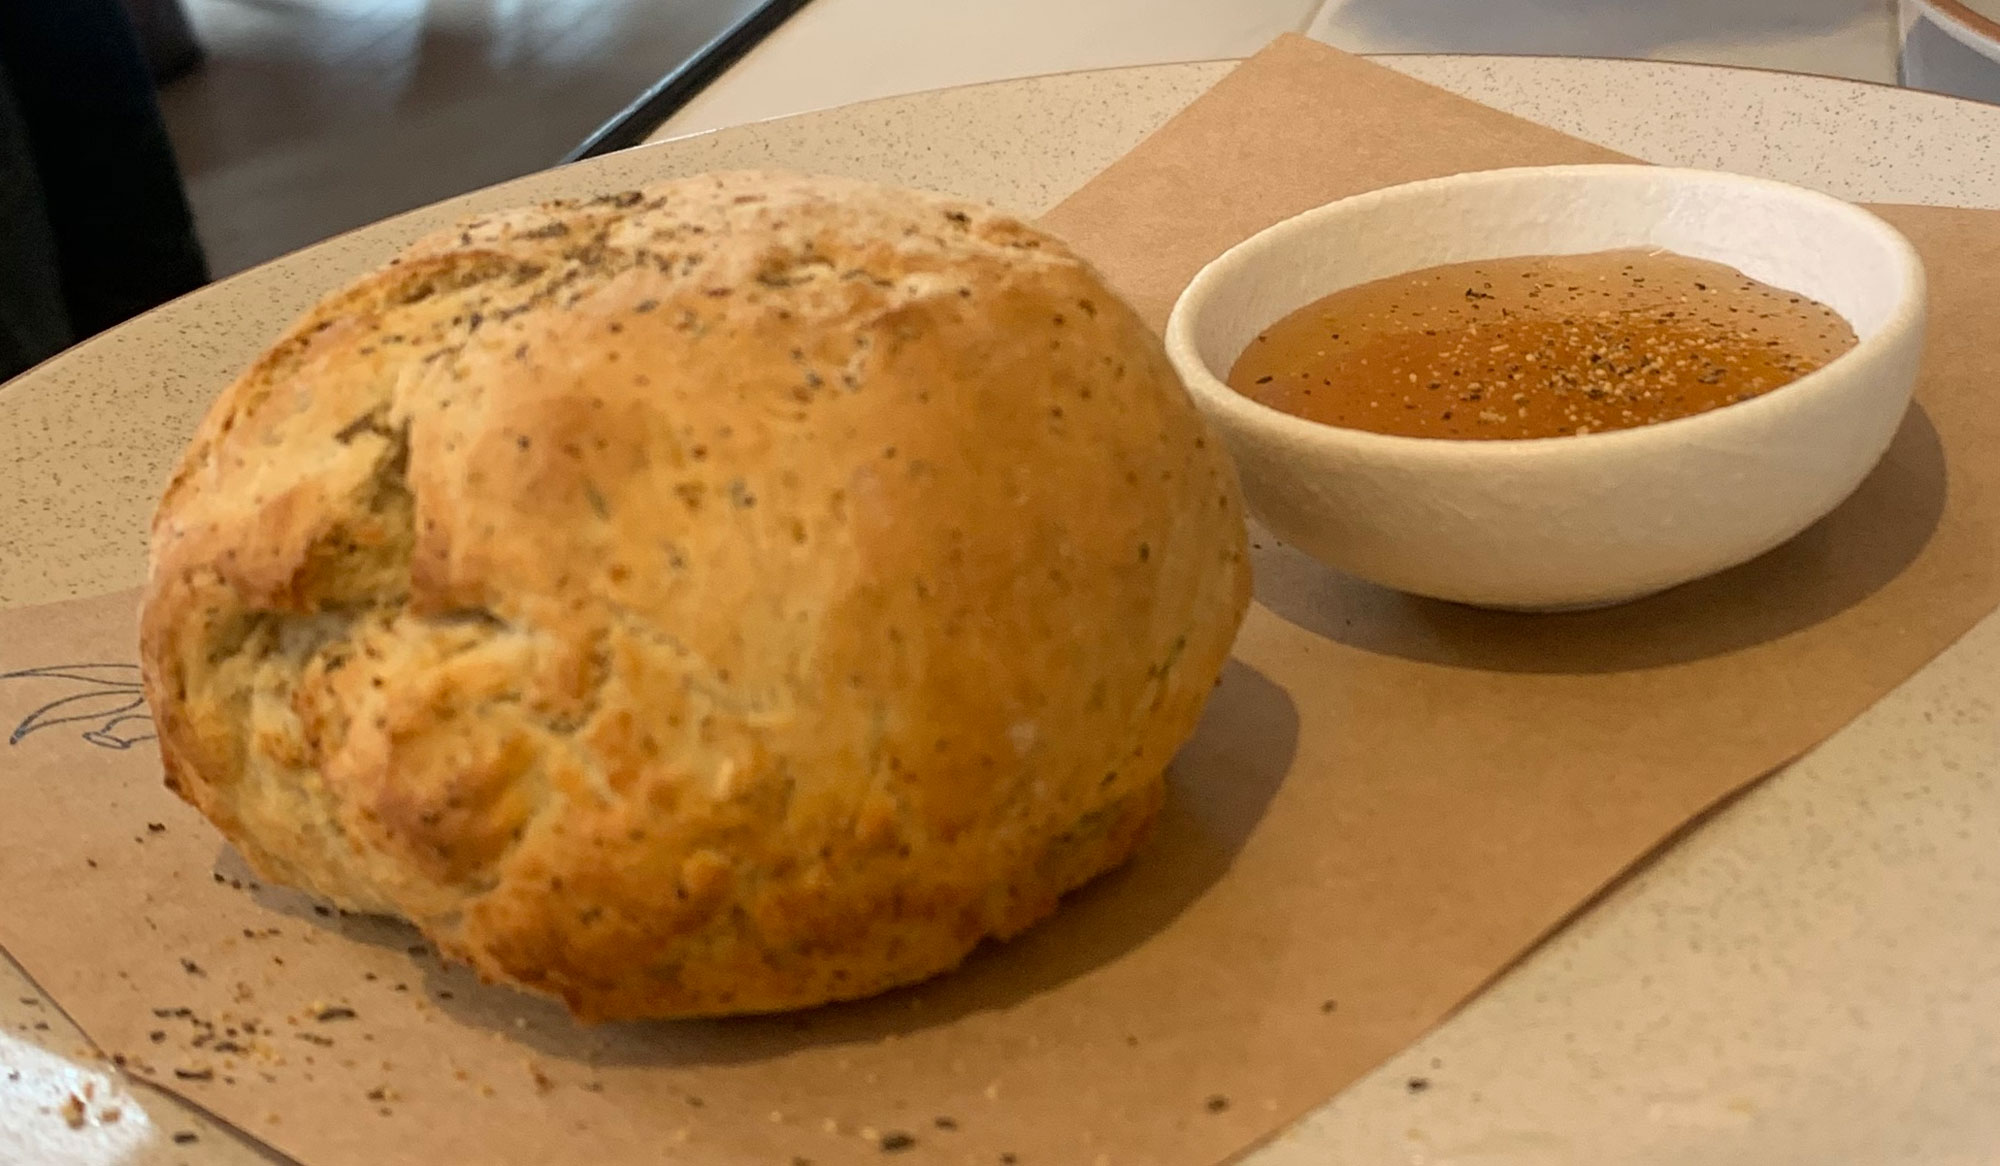 Photograph of damper, a type of bread from Australia. The photo shows a round loaf of damper bread with golden-brown crust next to a small, white bowl of oil with herbs in it. The damper bread and bowl sit on brown paper placed on a serving dish.